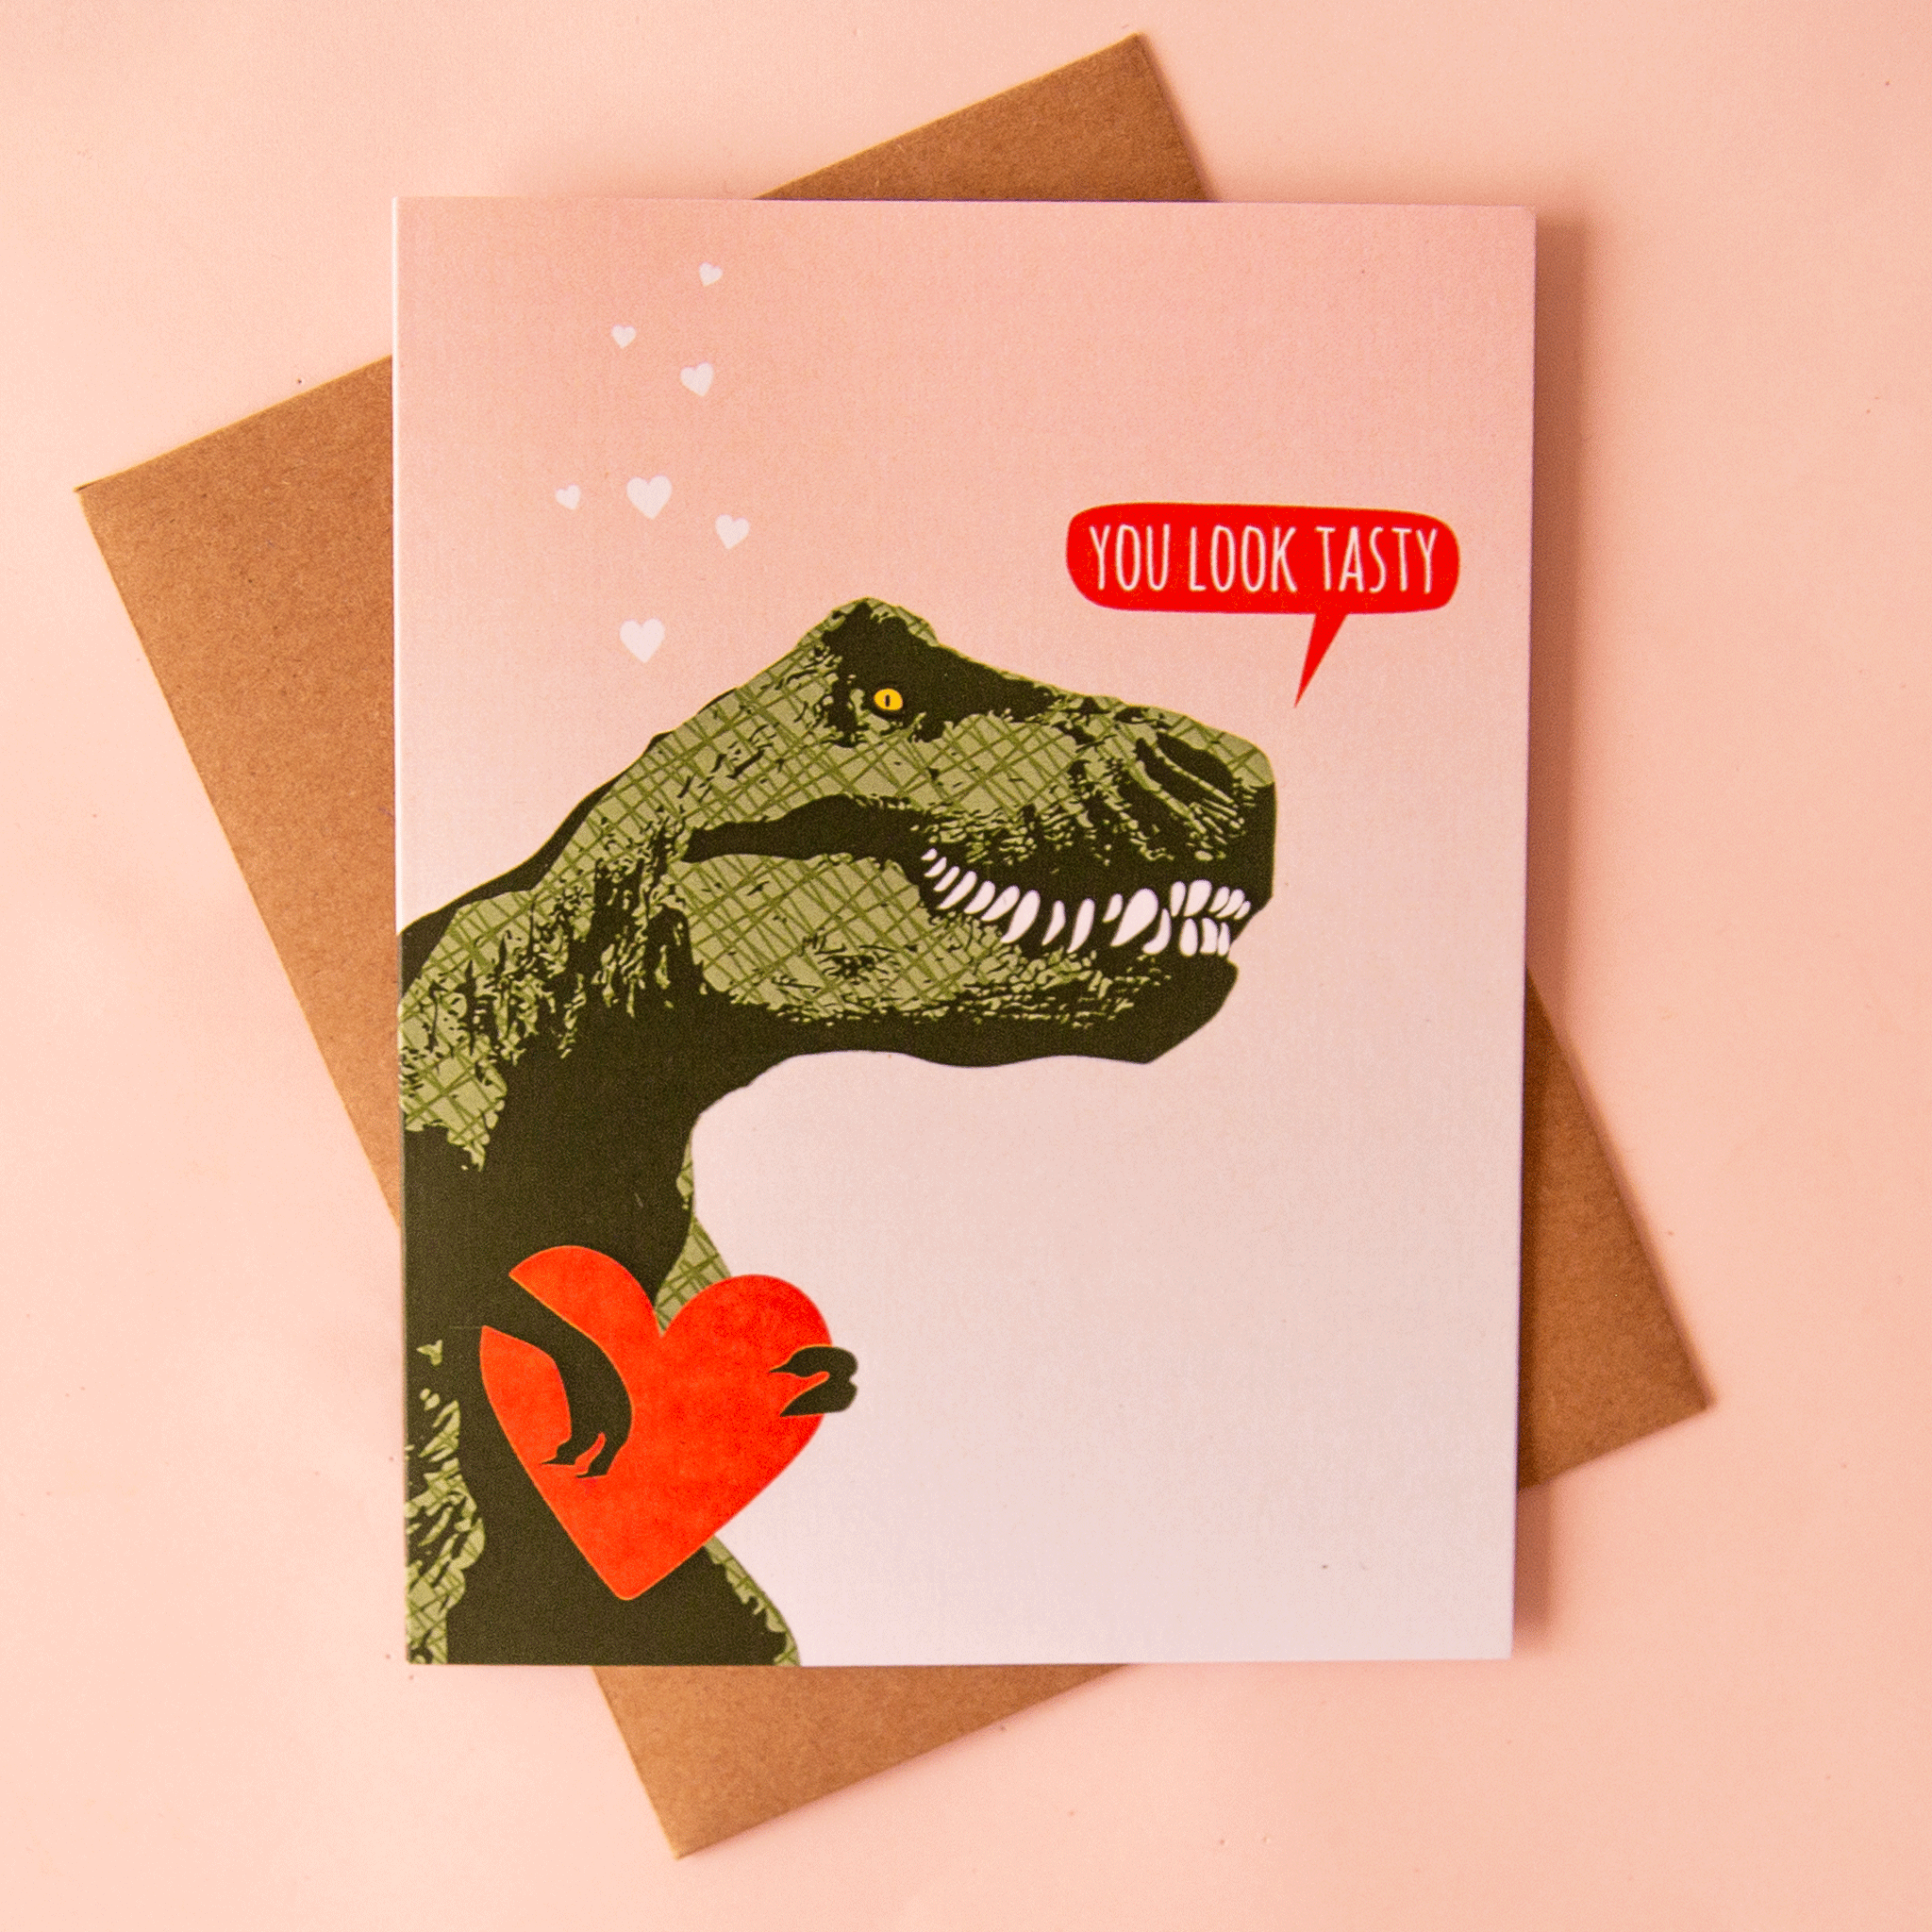 On a pink background is a pink card with a green t-rex illustration that's holding a heart and a speech bubble that reads, "You Look Tasty".